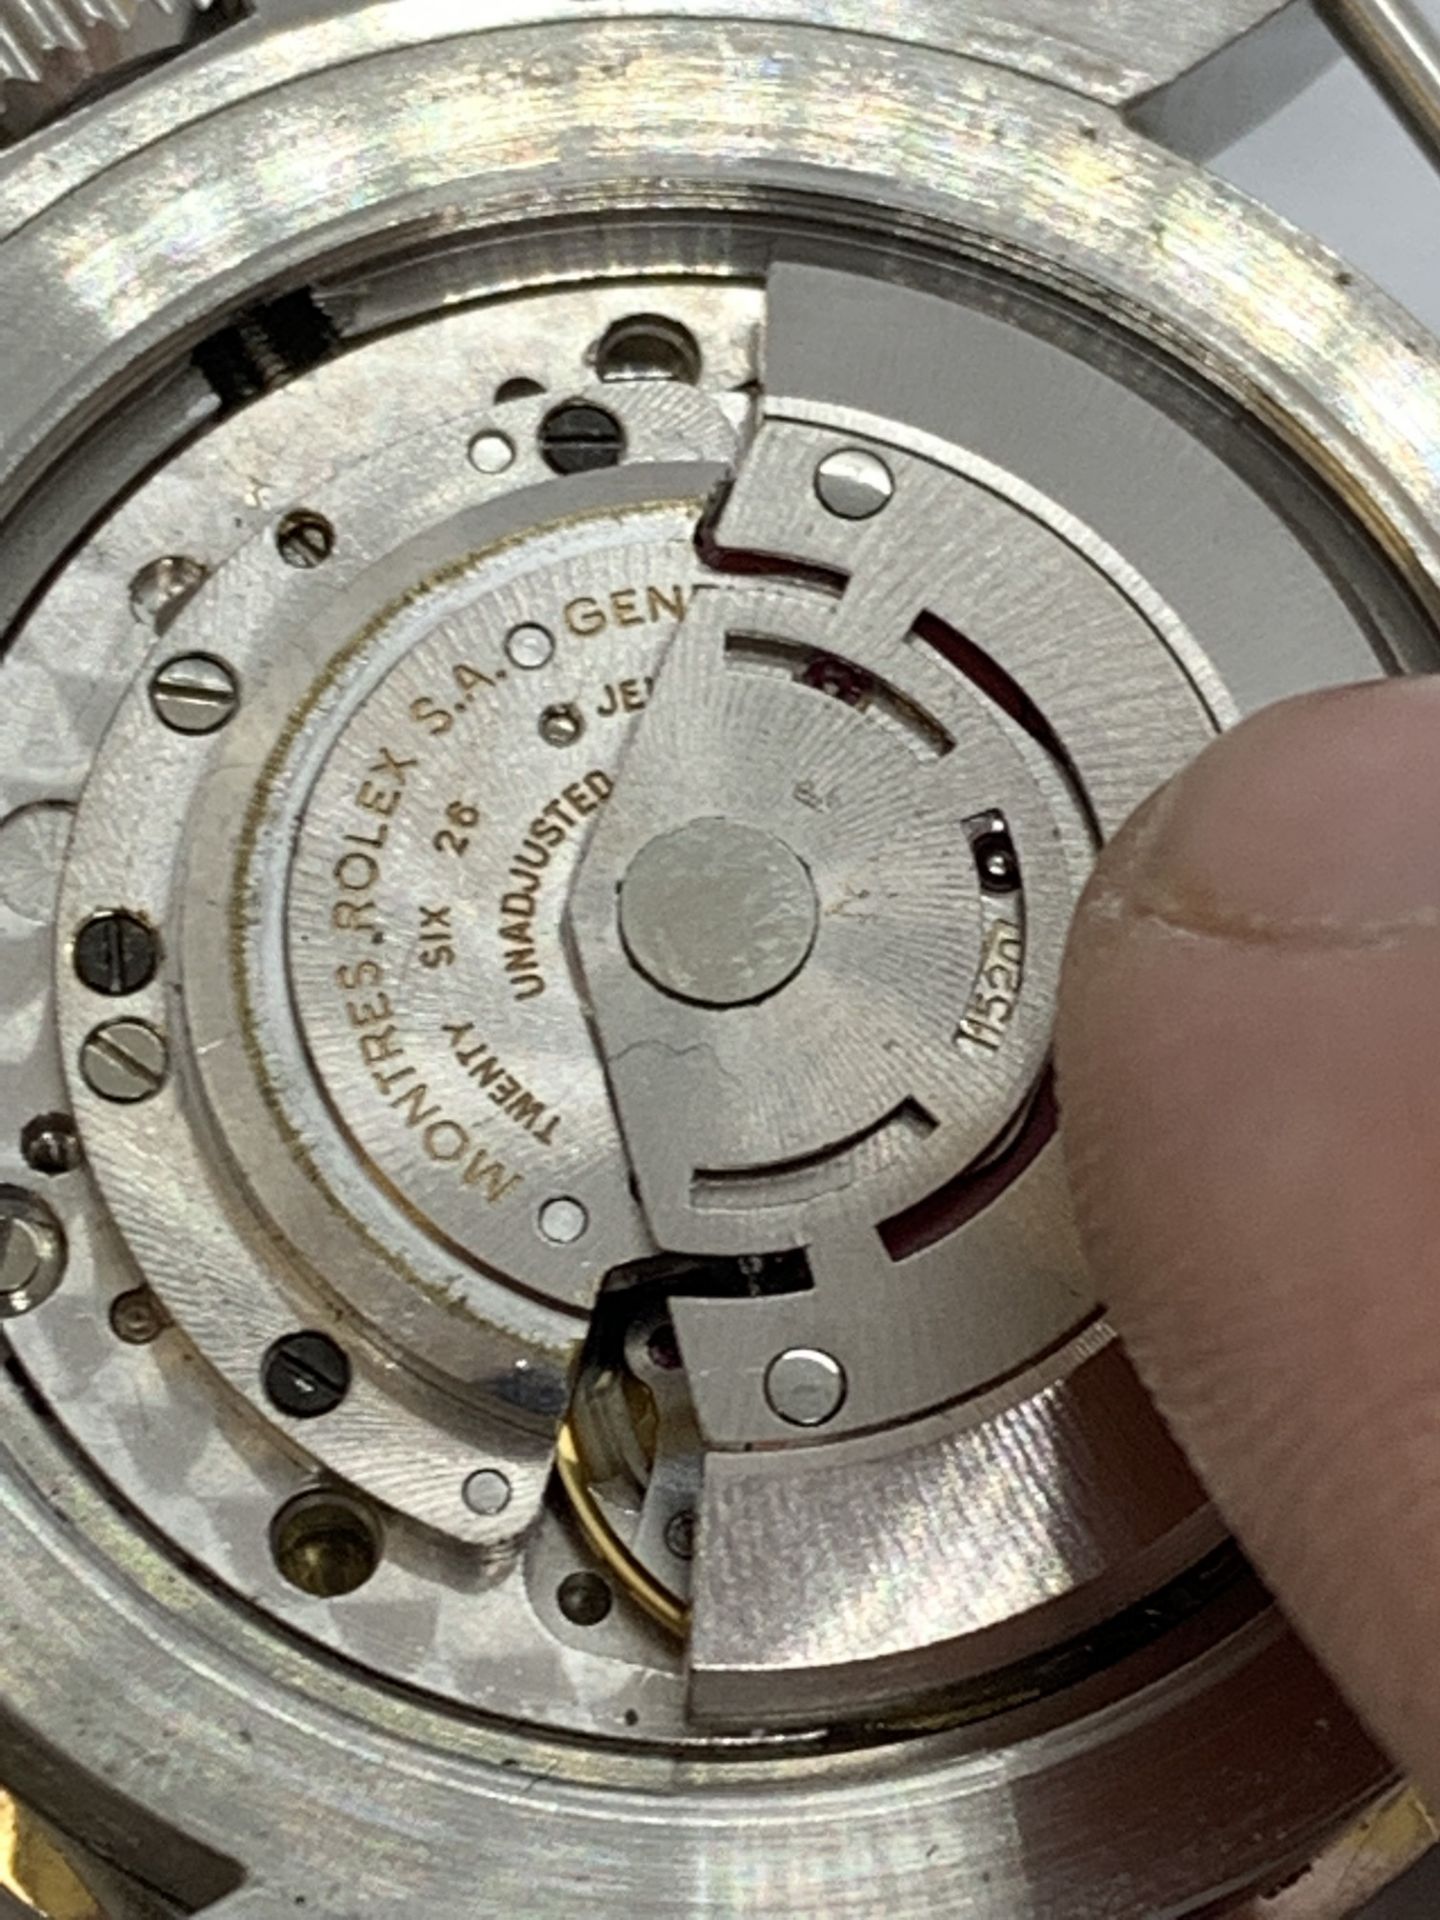 WATCH MARKED "ROLEX" - ONLY MOVEMENT AUTHENTICATED AS ROLEX - Image 13 of 15